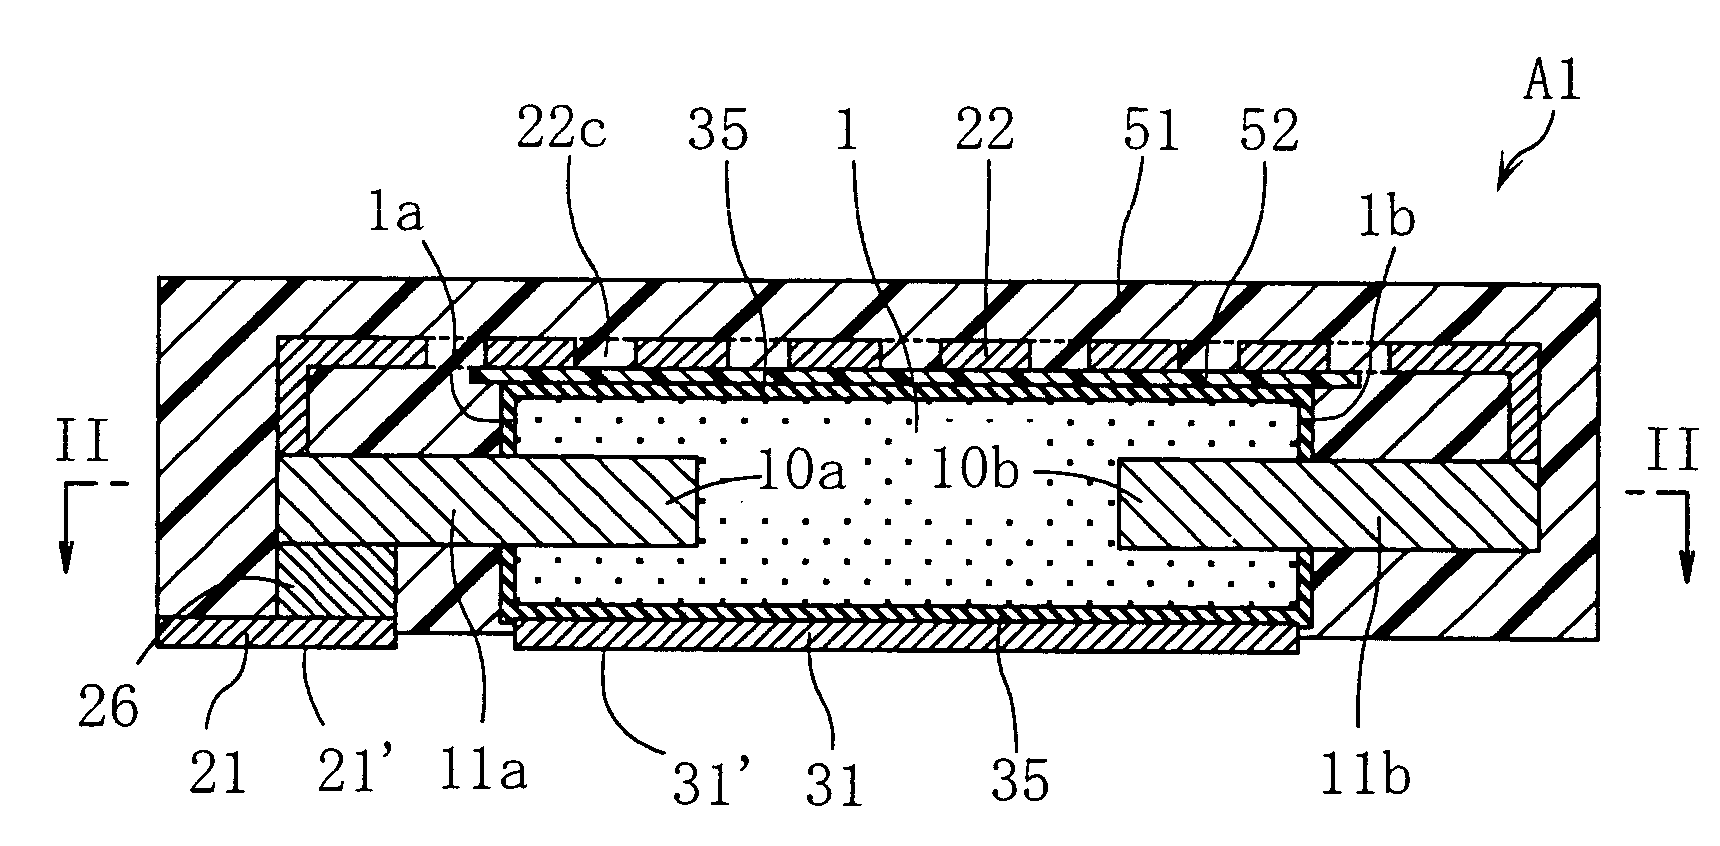 Solid electrolytic capacitor with first and second anode wires